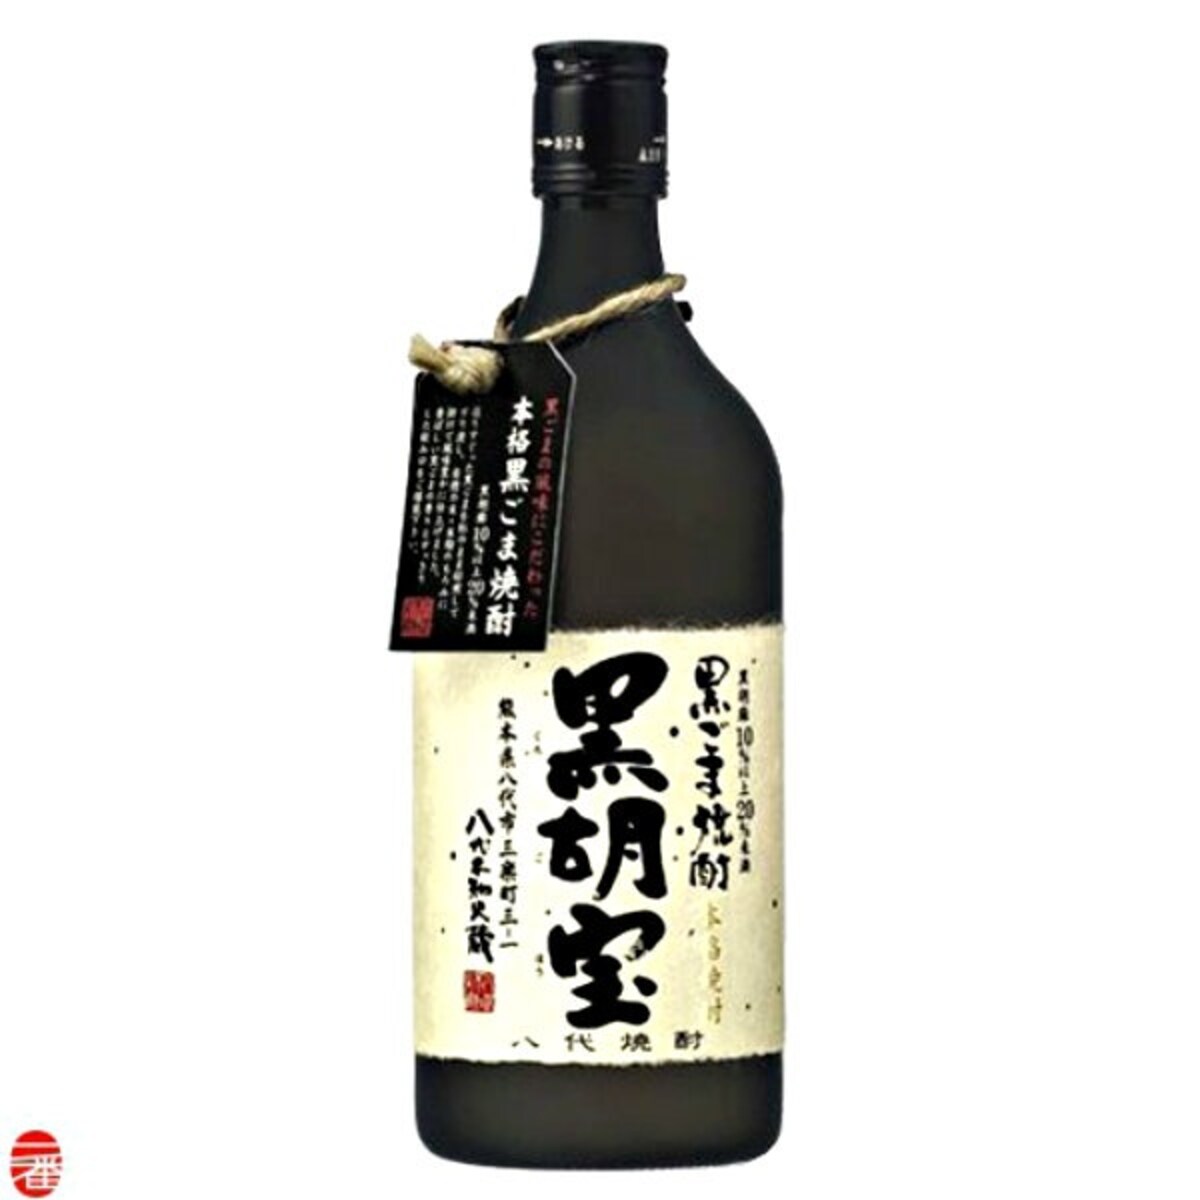 A 13 Point Guide to Japanese Alcohol All About Japan